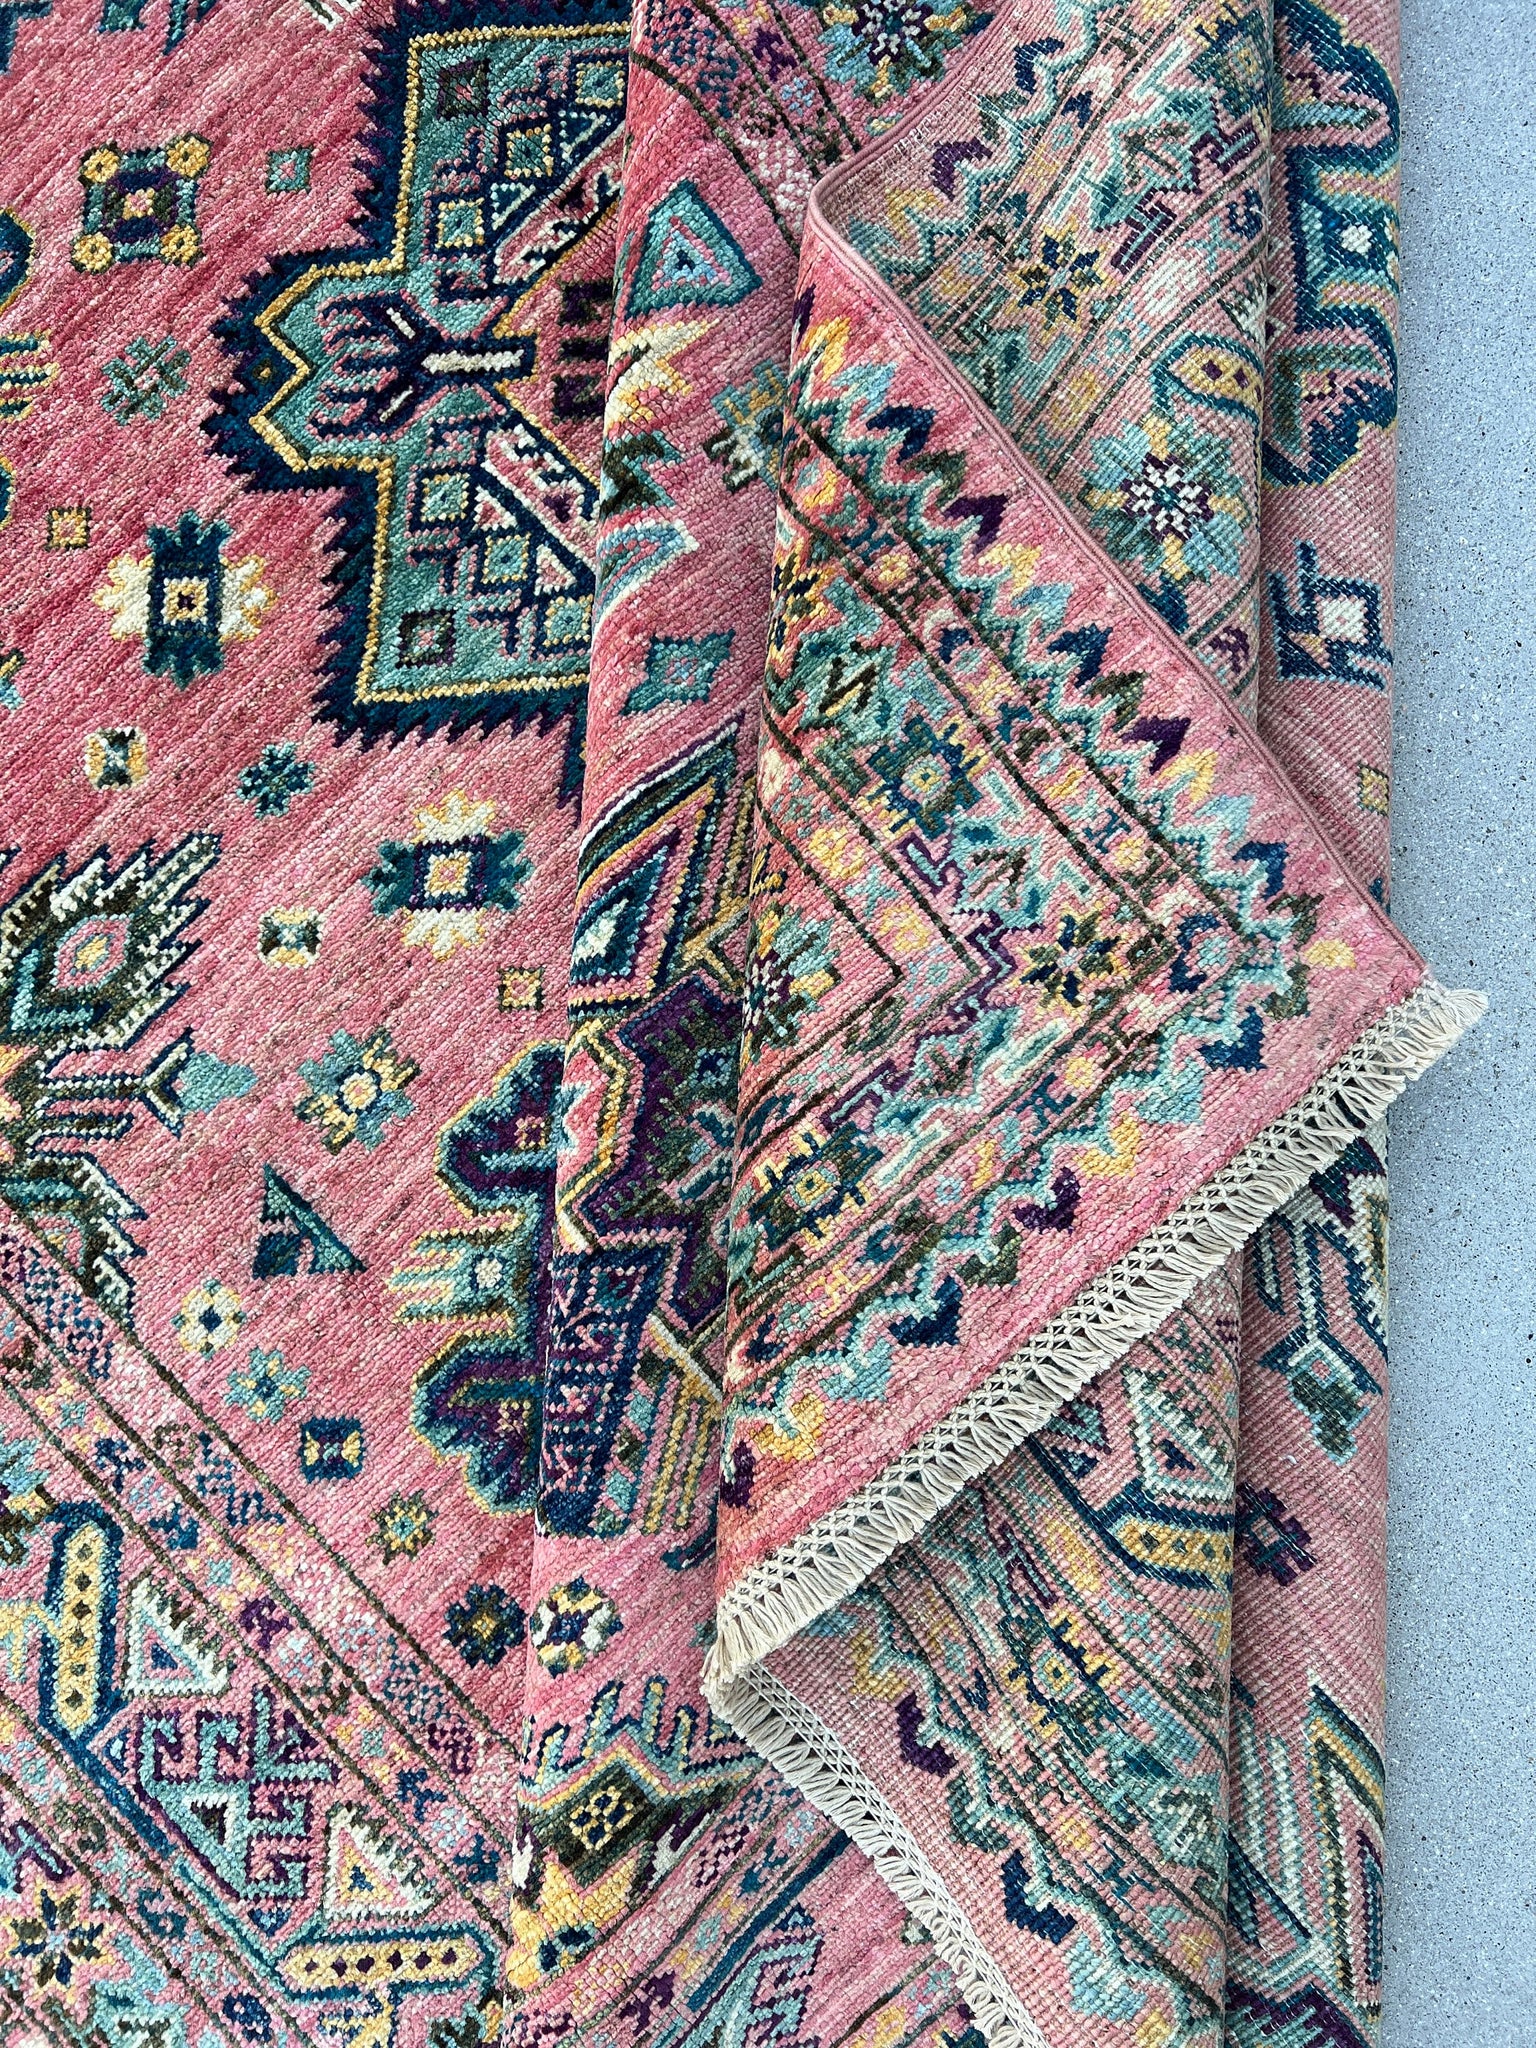 6x9 Handmade Afghan Rug | Pink Purple Gold Caramel Navy Blue Forest Sage Green Turquoise Teal Ivory | Hand Knotted Persian Bohemian Wool